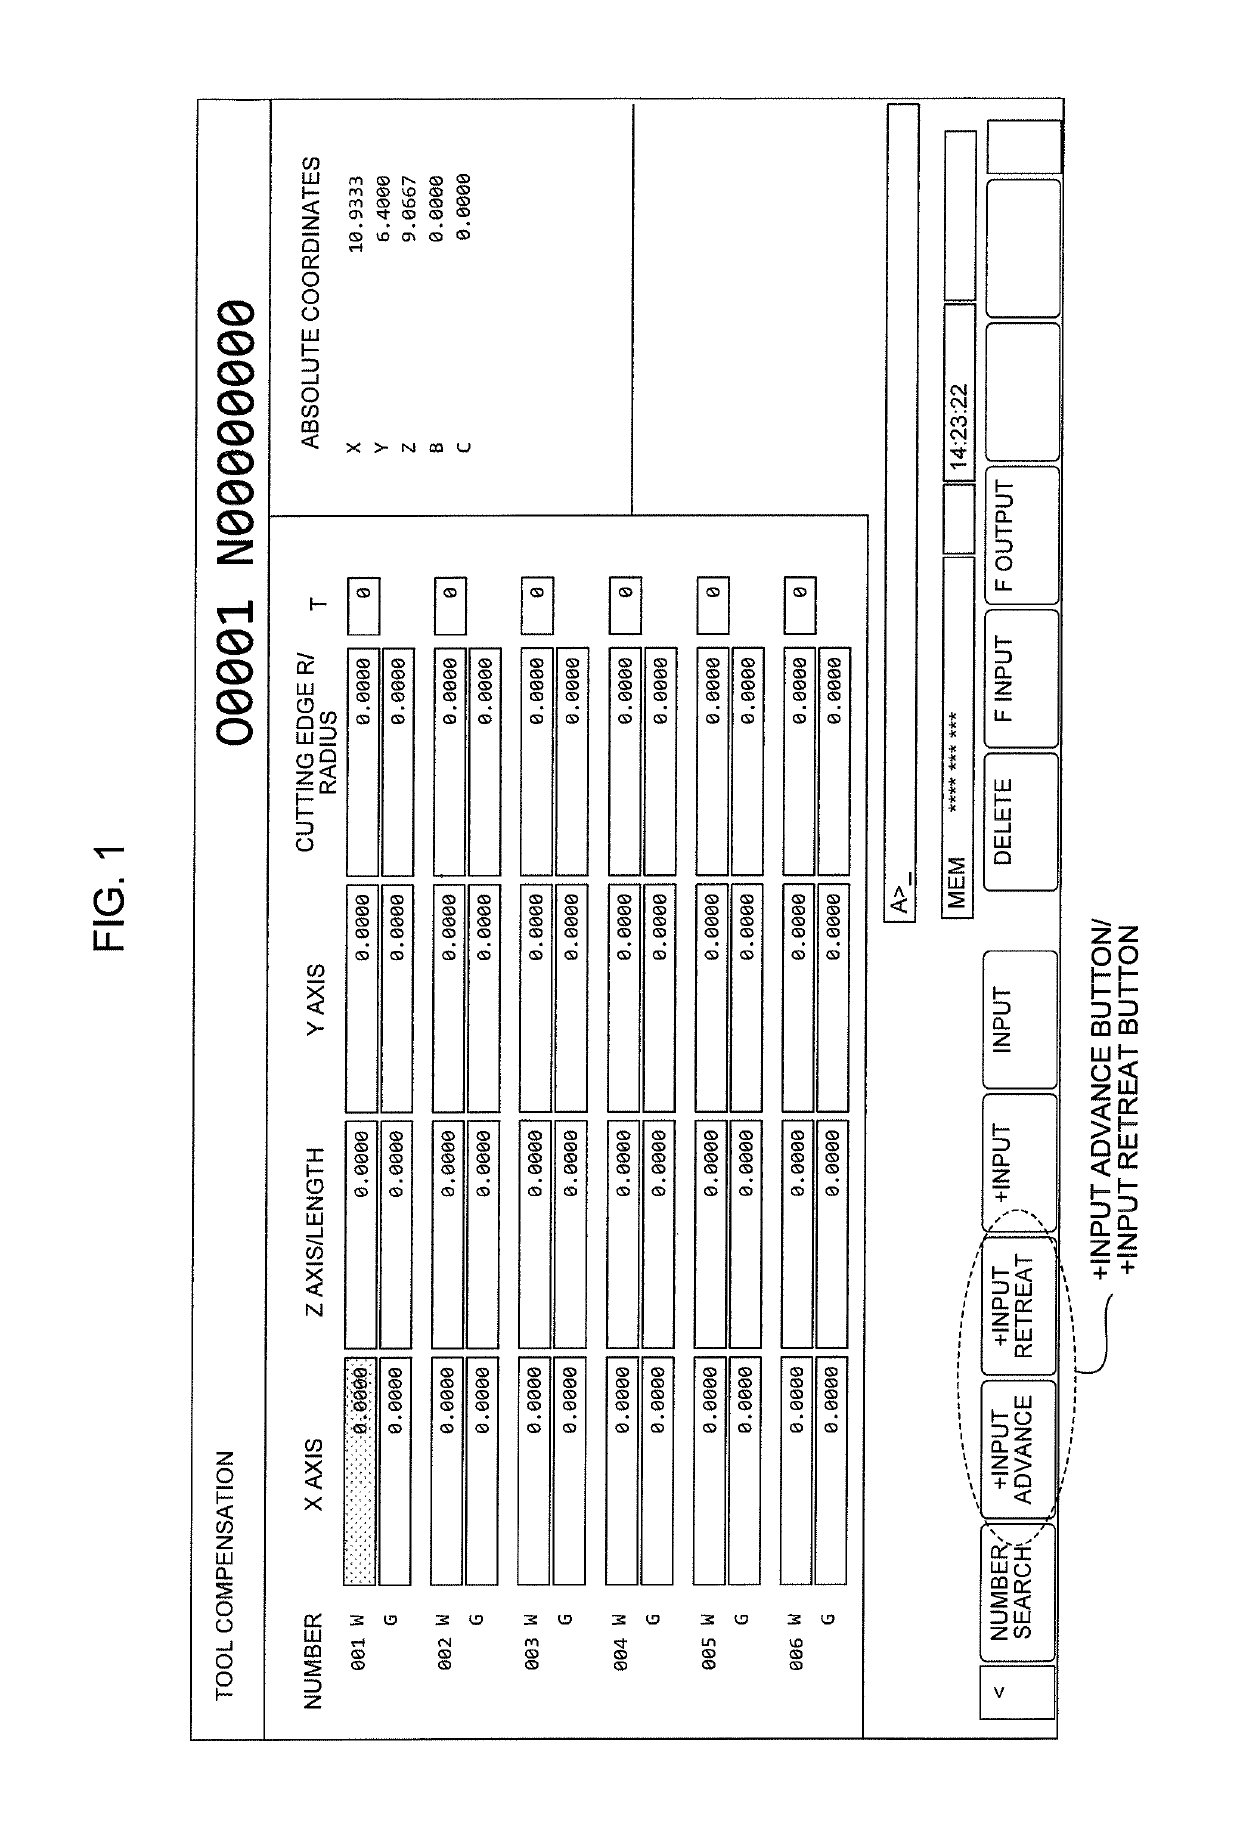 Numerical controller that prevents a tool compensation value setting error